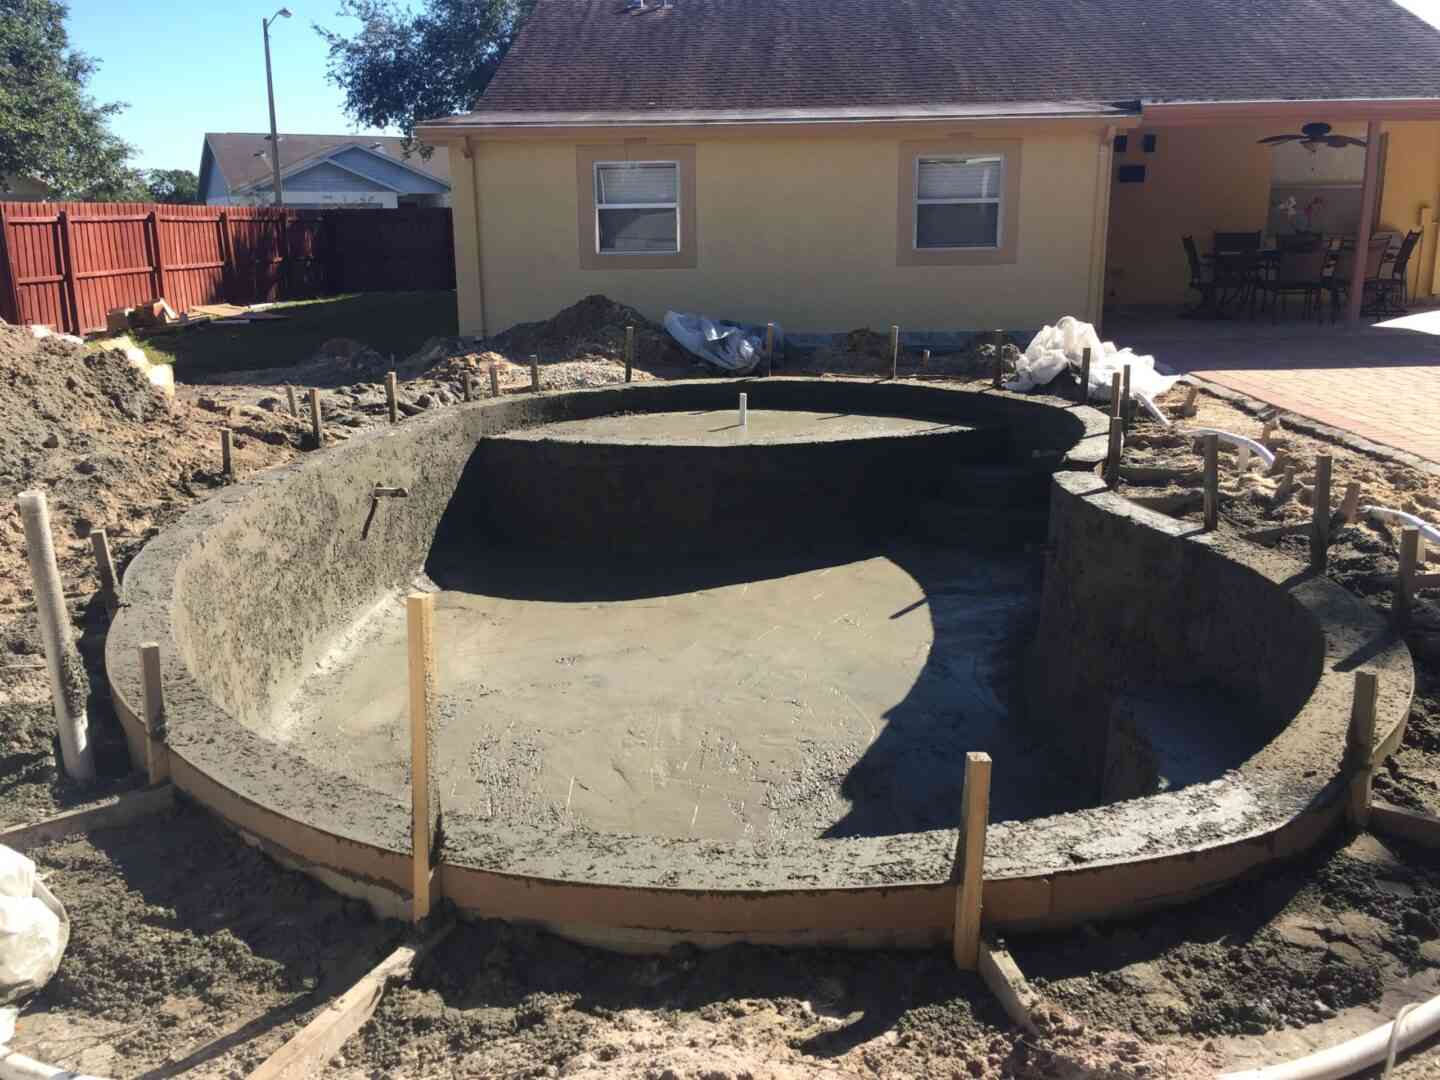 Pool structure being placed